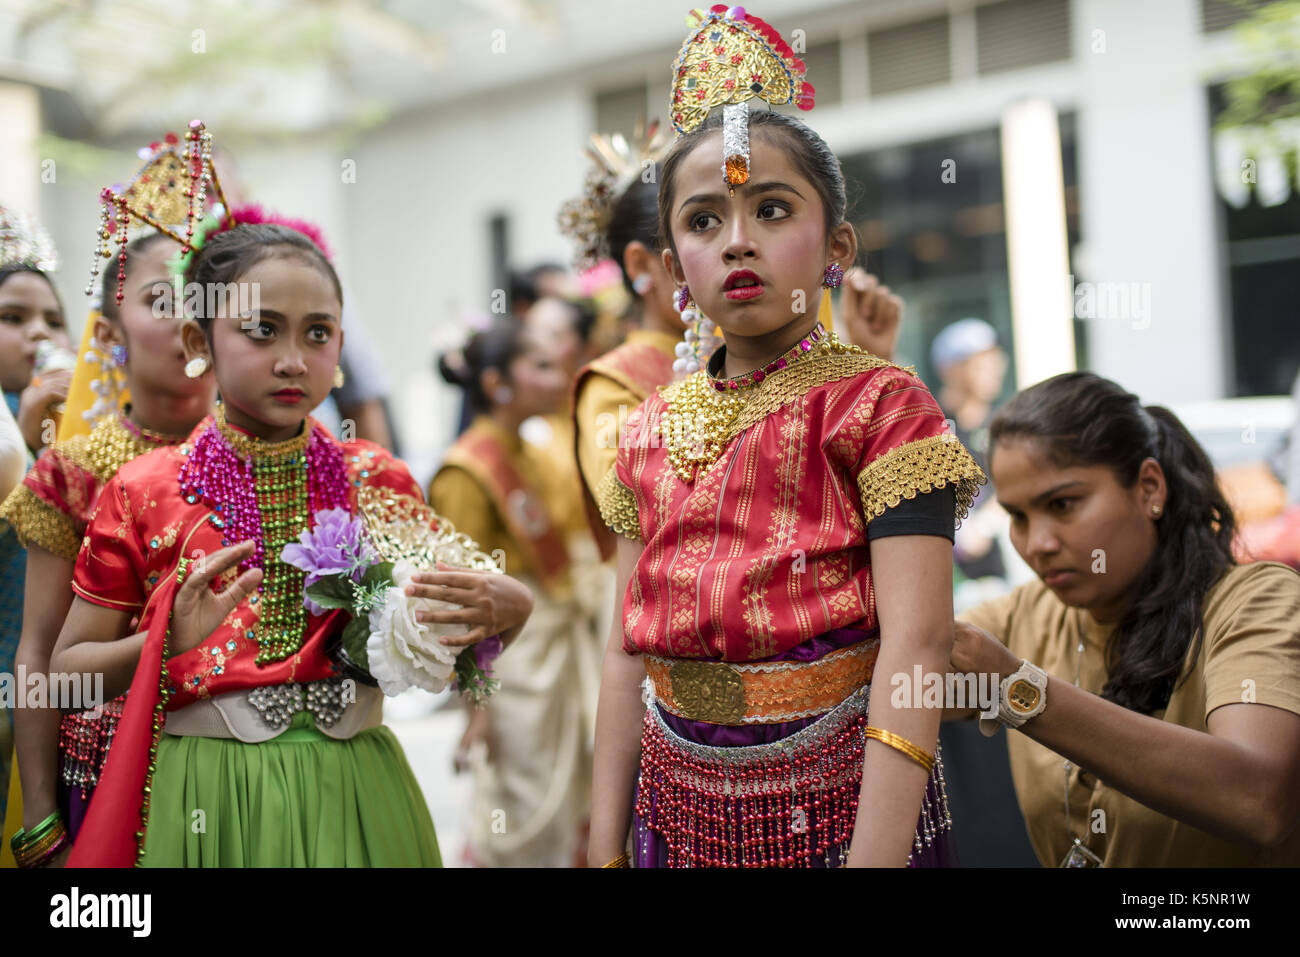 Kuala Lumpur, MALAYSIA. 10th Sep, 2017. Malaysian kids wearing traditional costumes during the Japanese annual 'Bon Odori' festival celebrations in Kuala Lumpur, Malaysia on September 10, 2017. Hundreds of participants including both resident Japanese nationals and local Malaysians are celebrated the summer dance festival. Credit: Chris Jung/ZUMA Wire/Alamy Live News Stock Photo